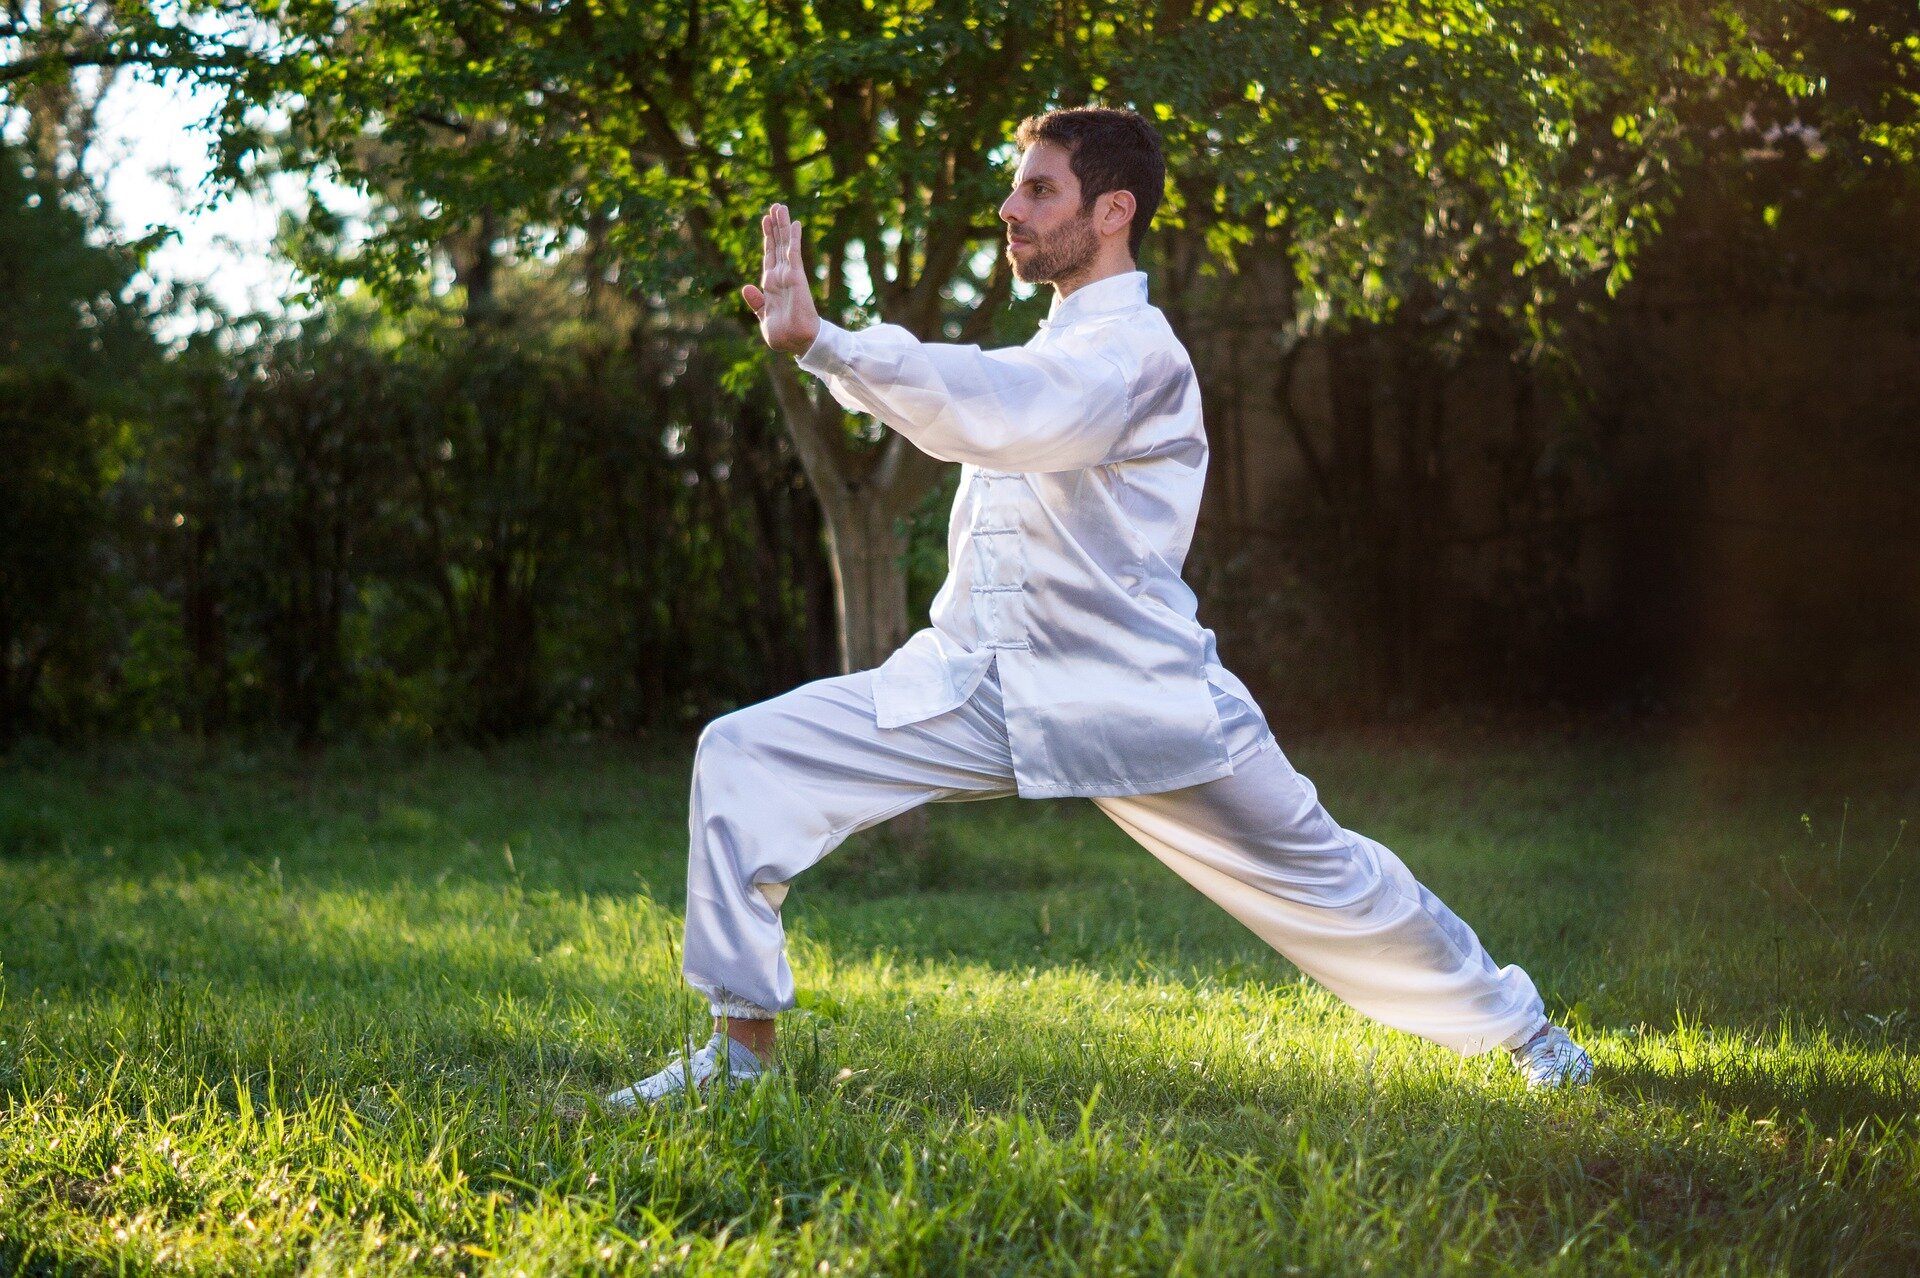 Tai chi may help manage Parkinson's disease symptoms—new research